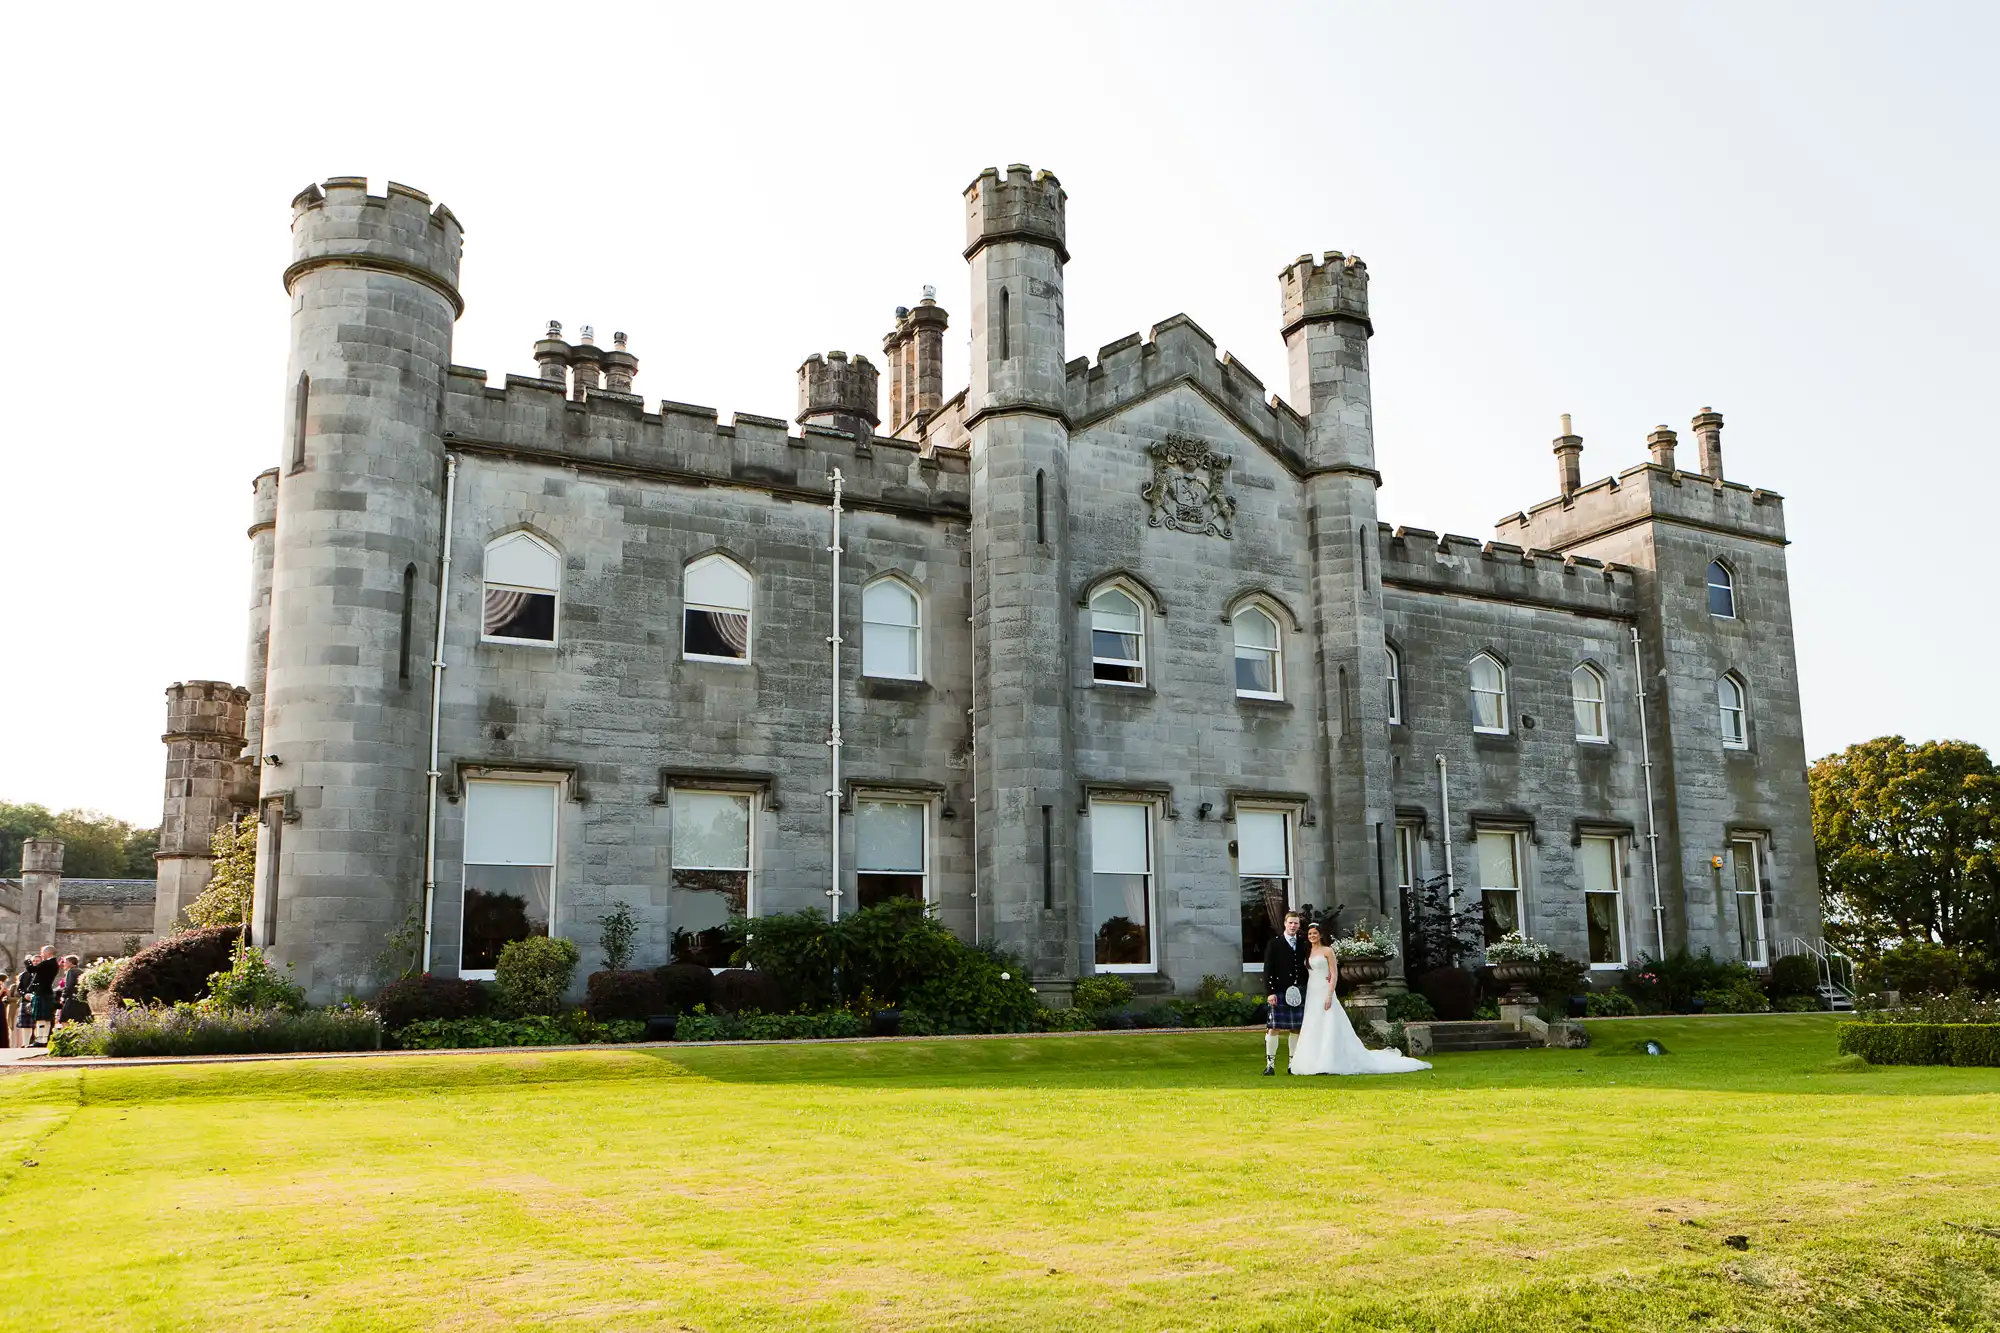 A bride and groom walk hand in hand on the lush lawn of an elegant, historic castle with tall towers.